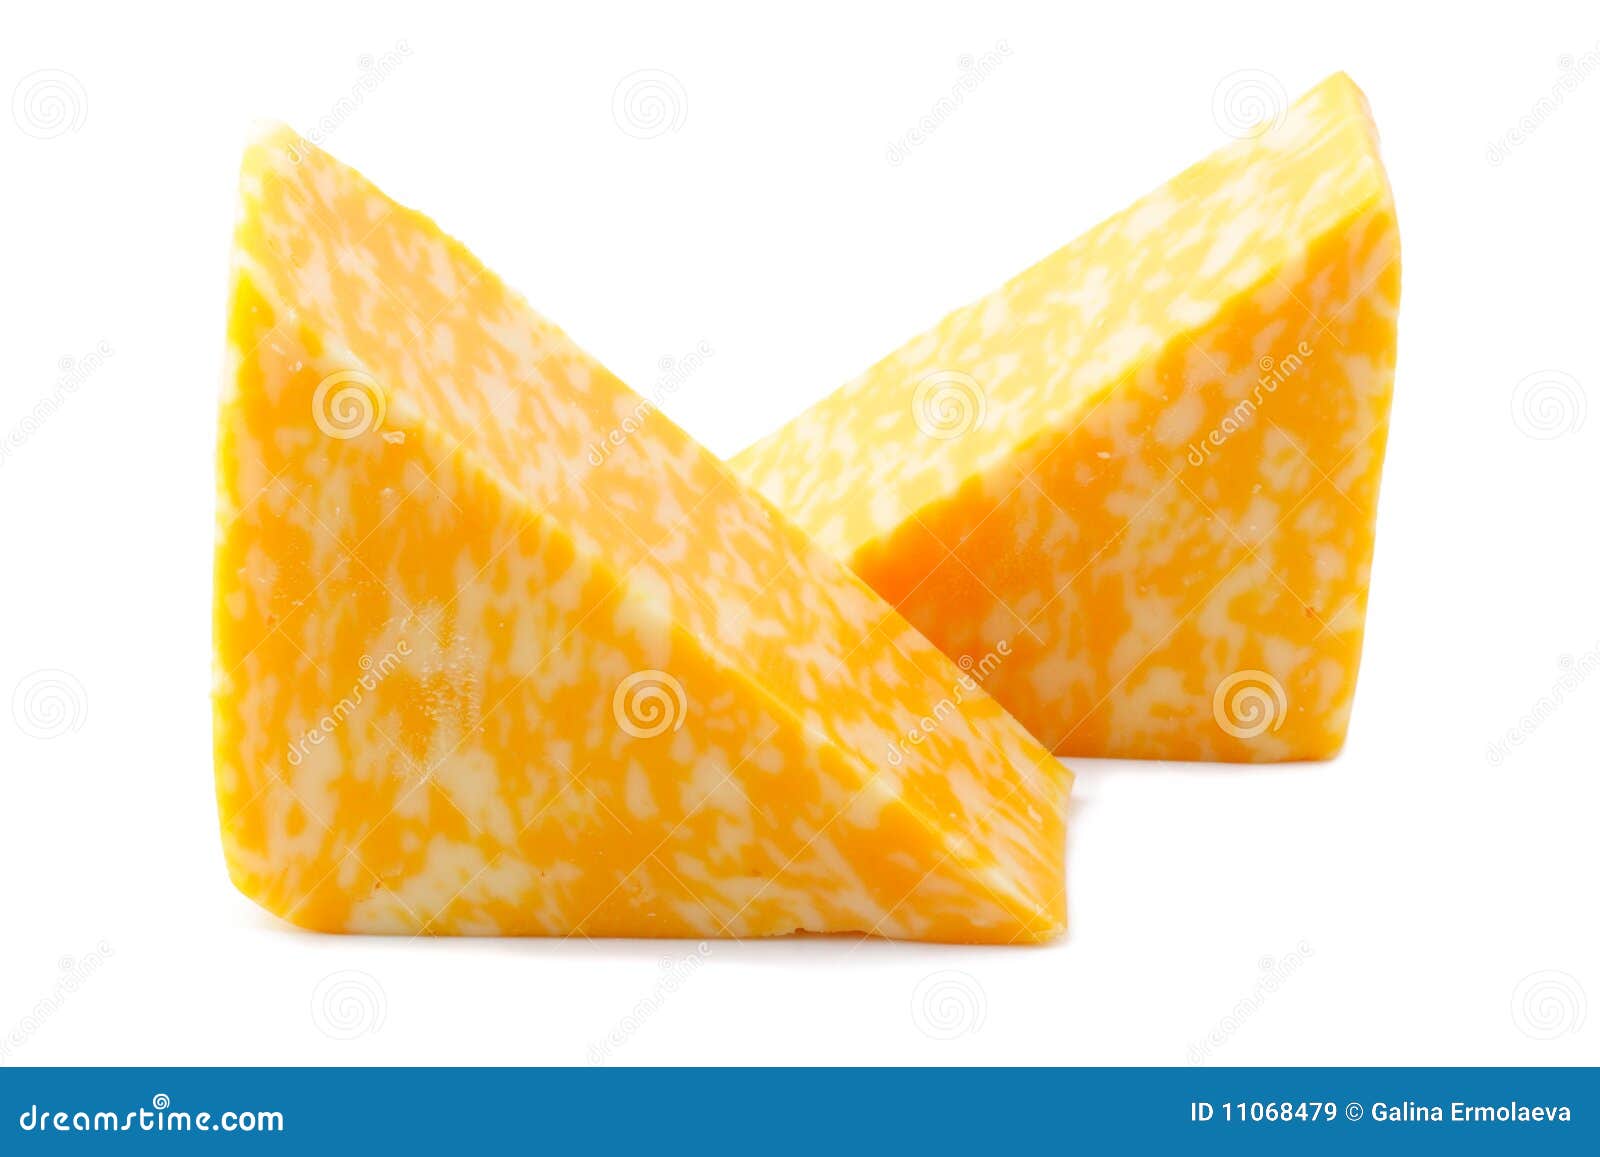 Download Two Pieces Of Marbled Cheese Stock Image Image Of Marbled Dairy 11068479 Yellowimages Mockups